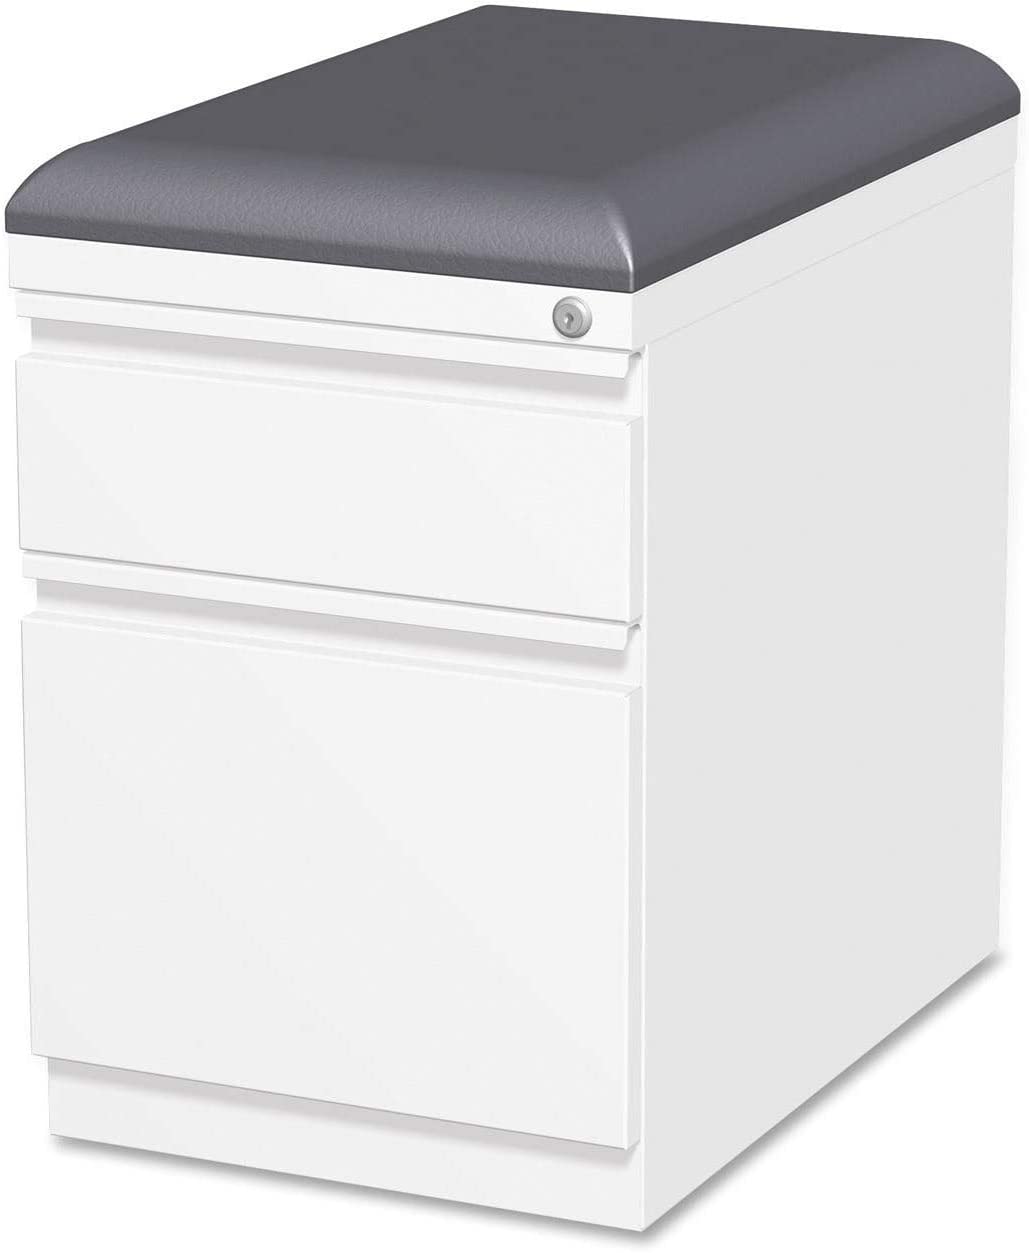 2 drawer file cabinet with cushion by factory